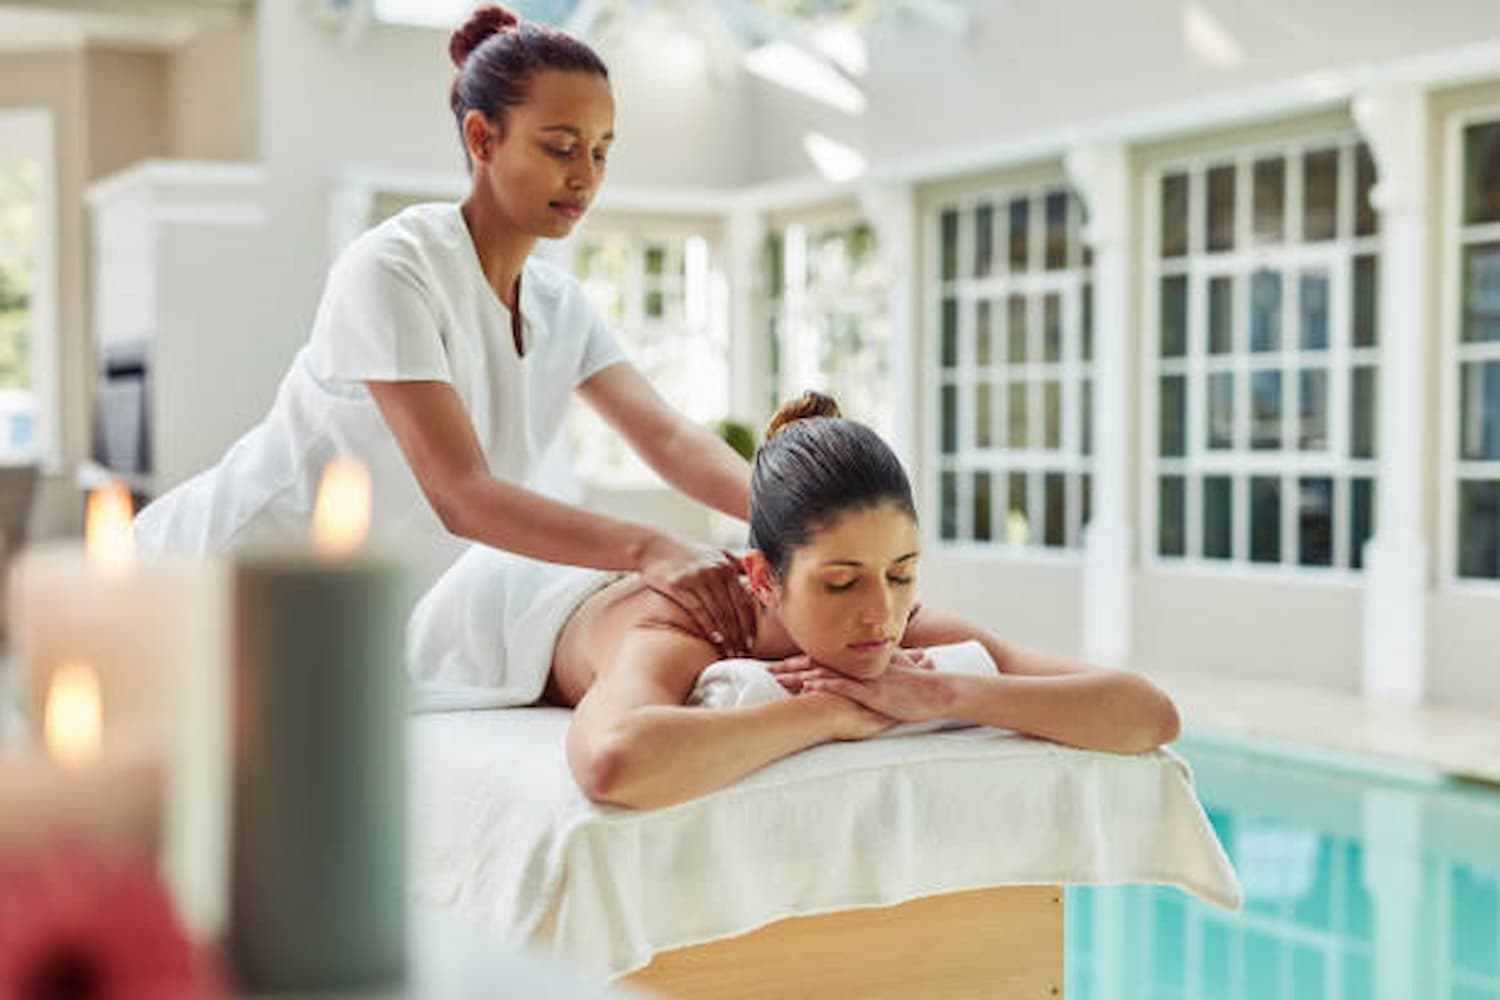 7 Ways to Effectively Advertise Your Massage Business